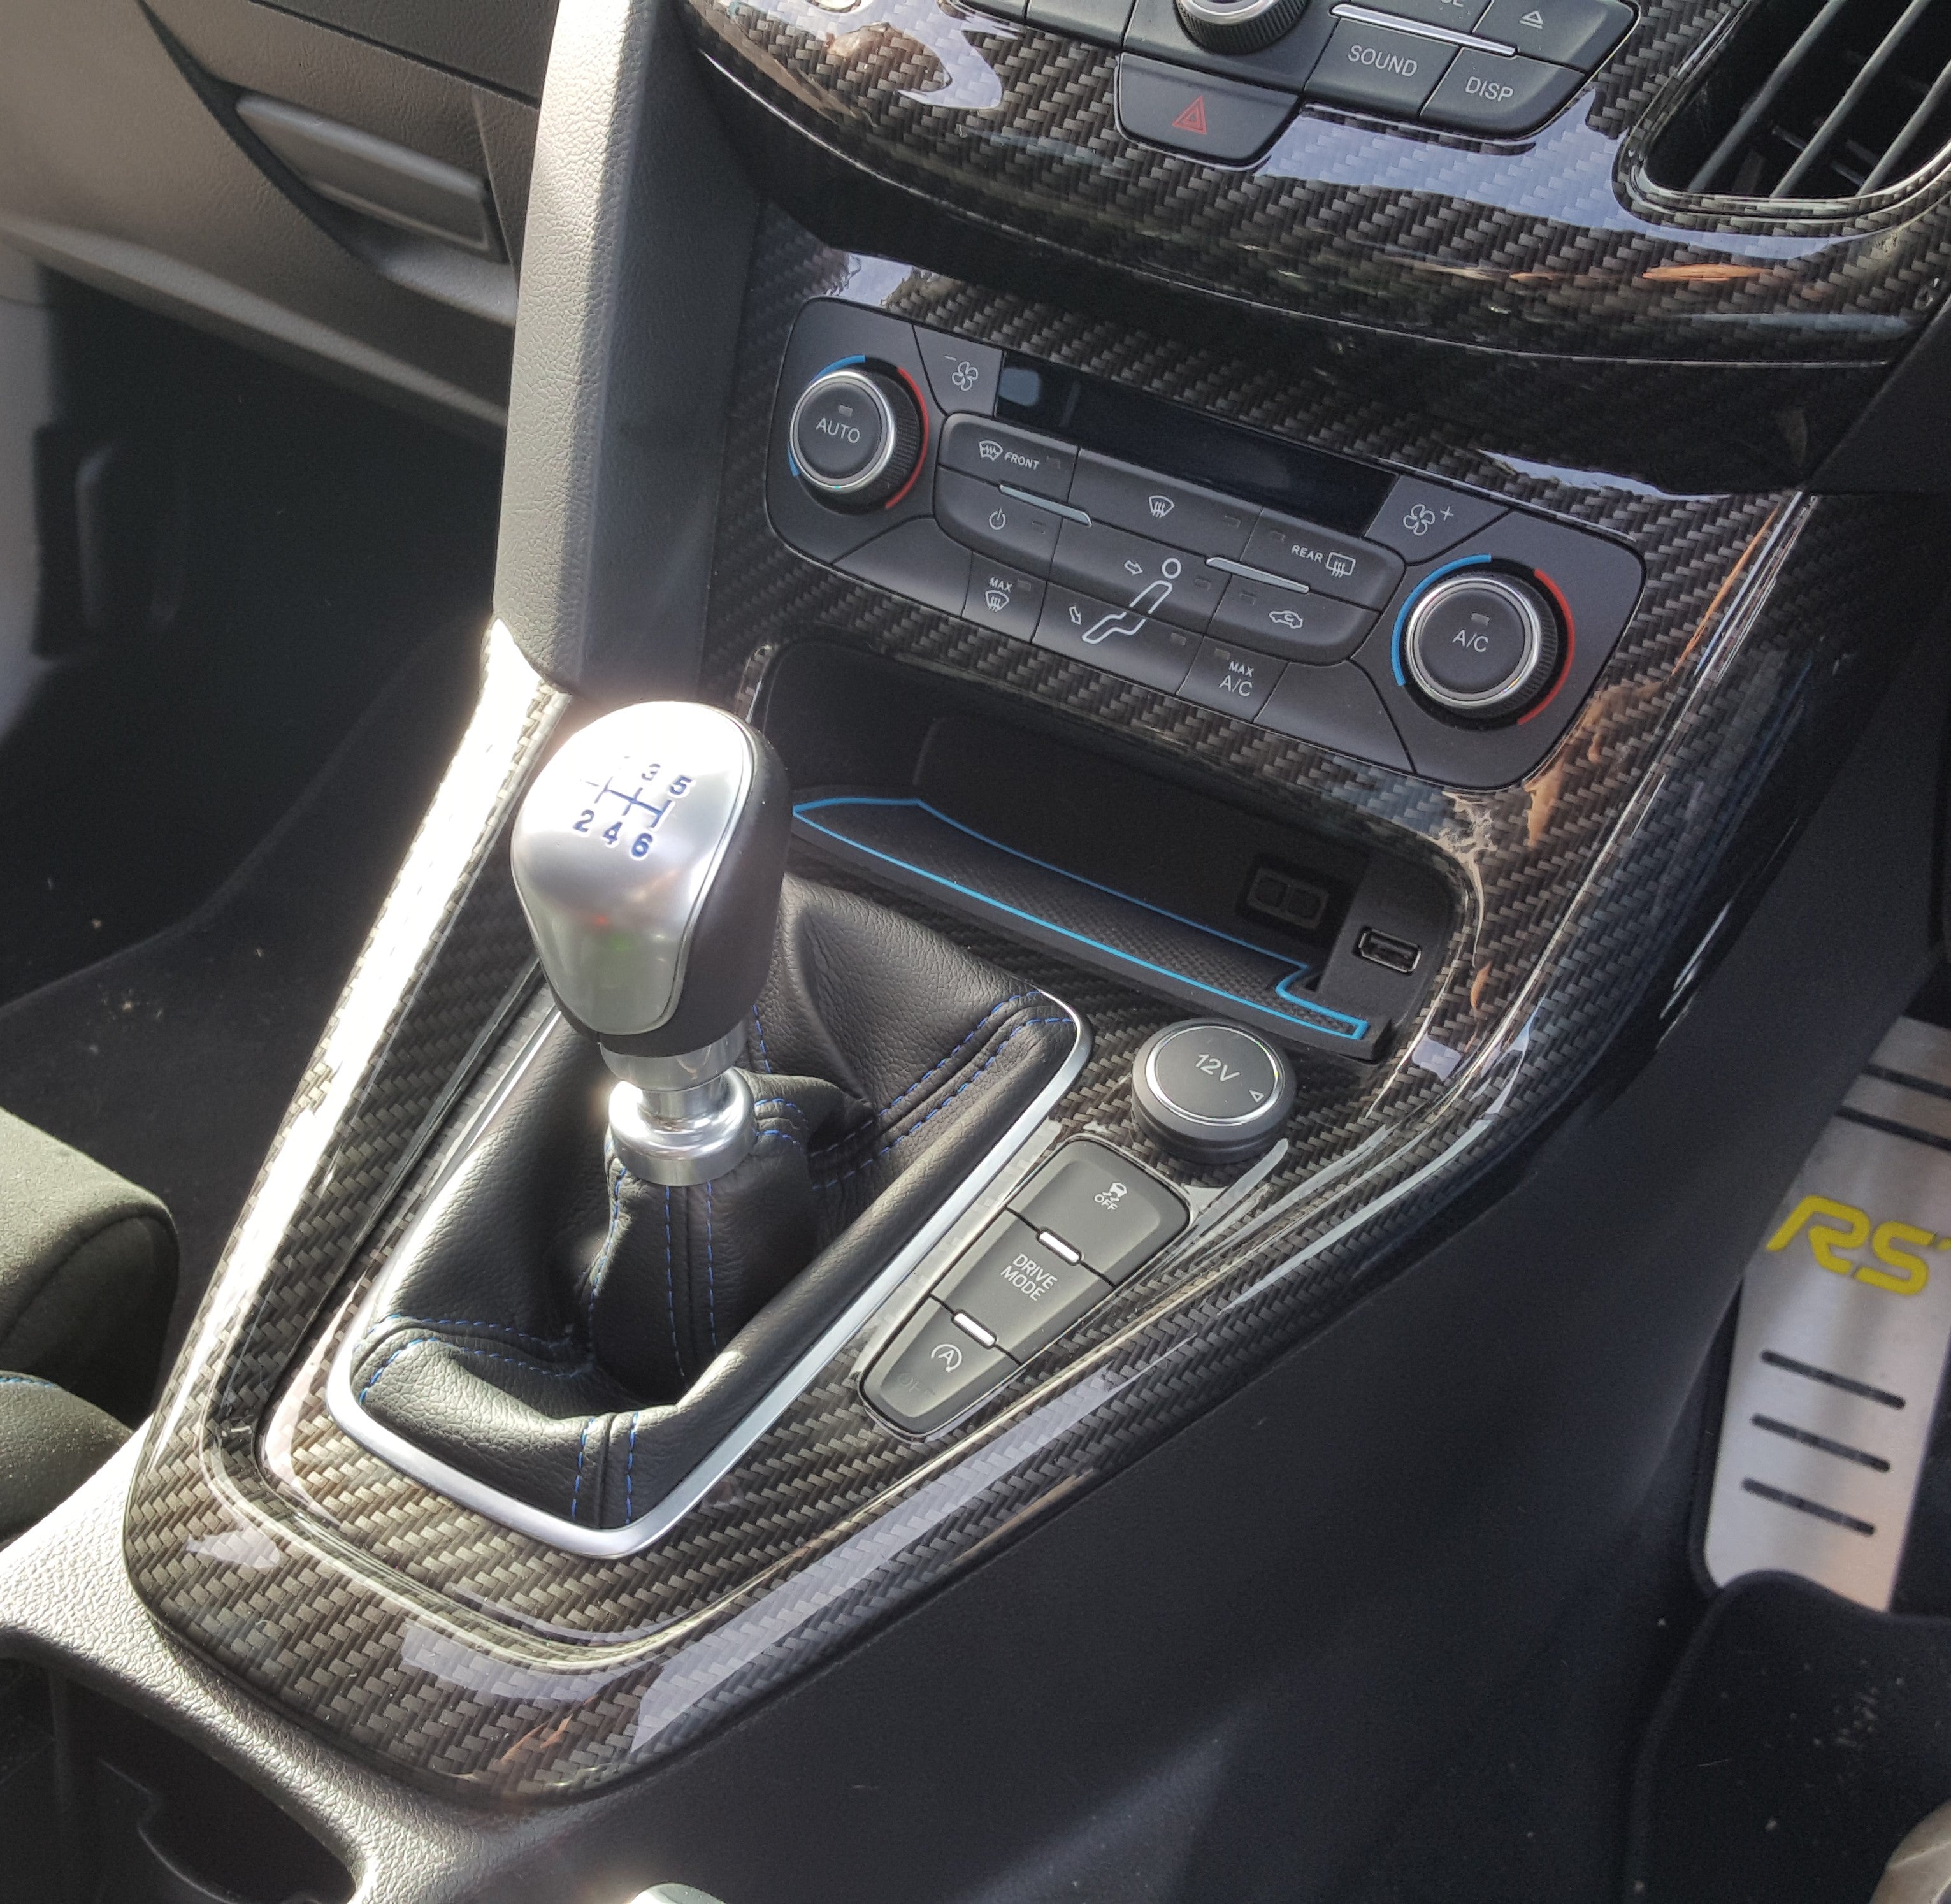 Genuine Ford Centre Console Control Panel - Mk3.5 Focus ST/RS (Painted/Hydrodipped Finishes)